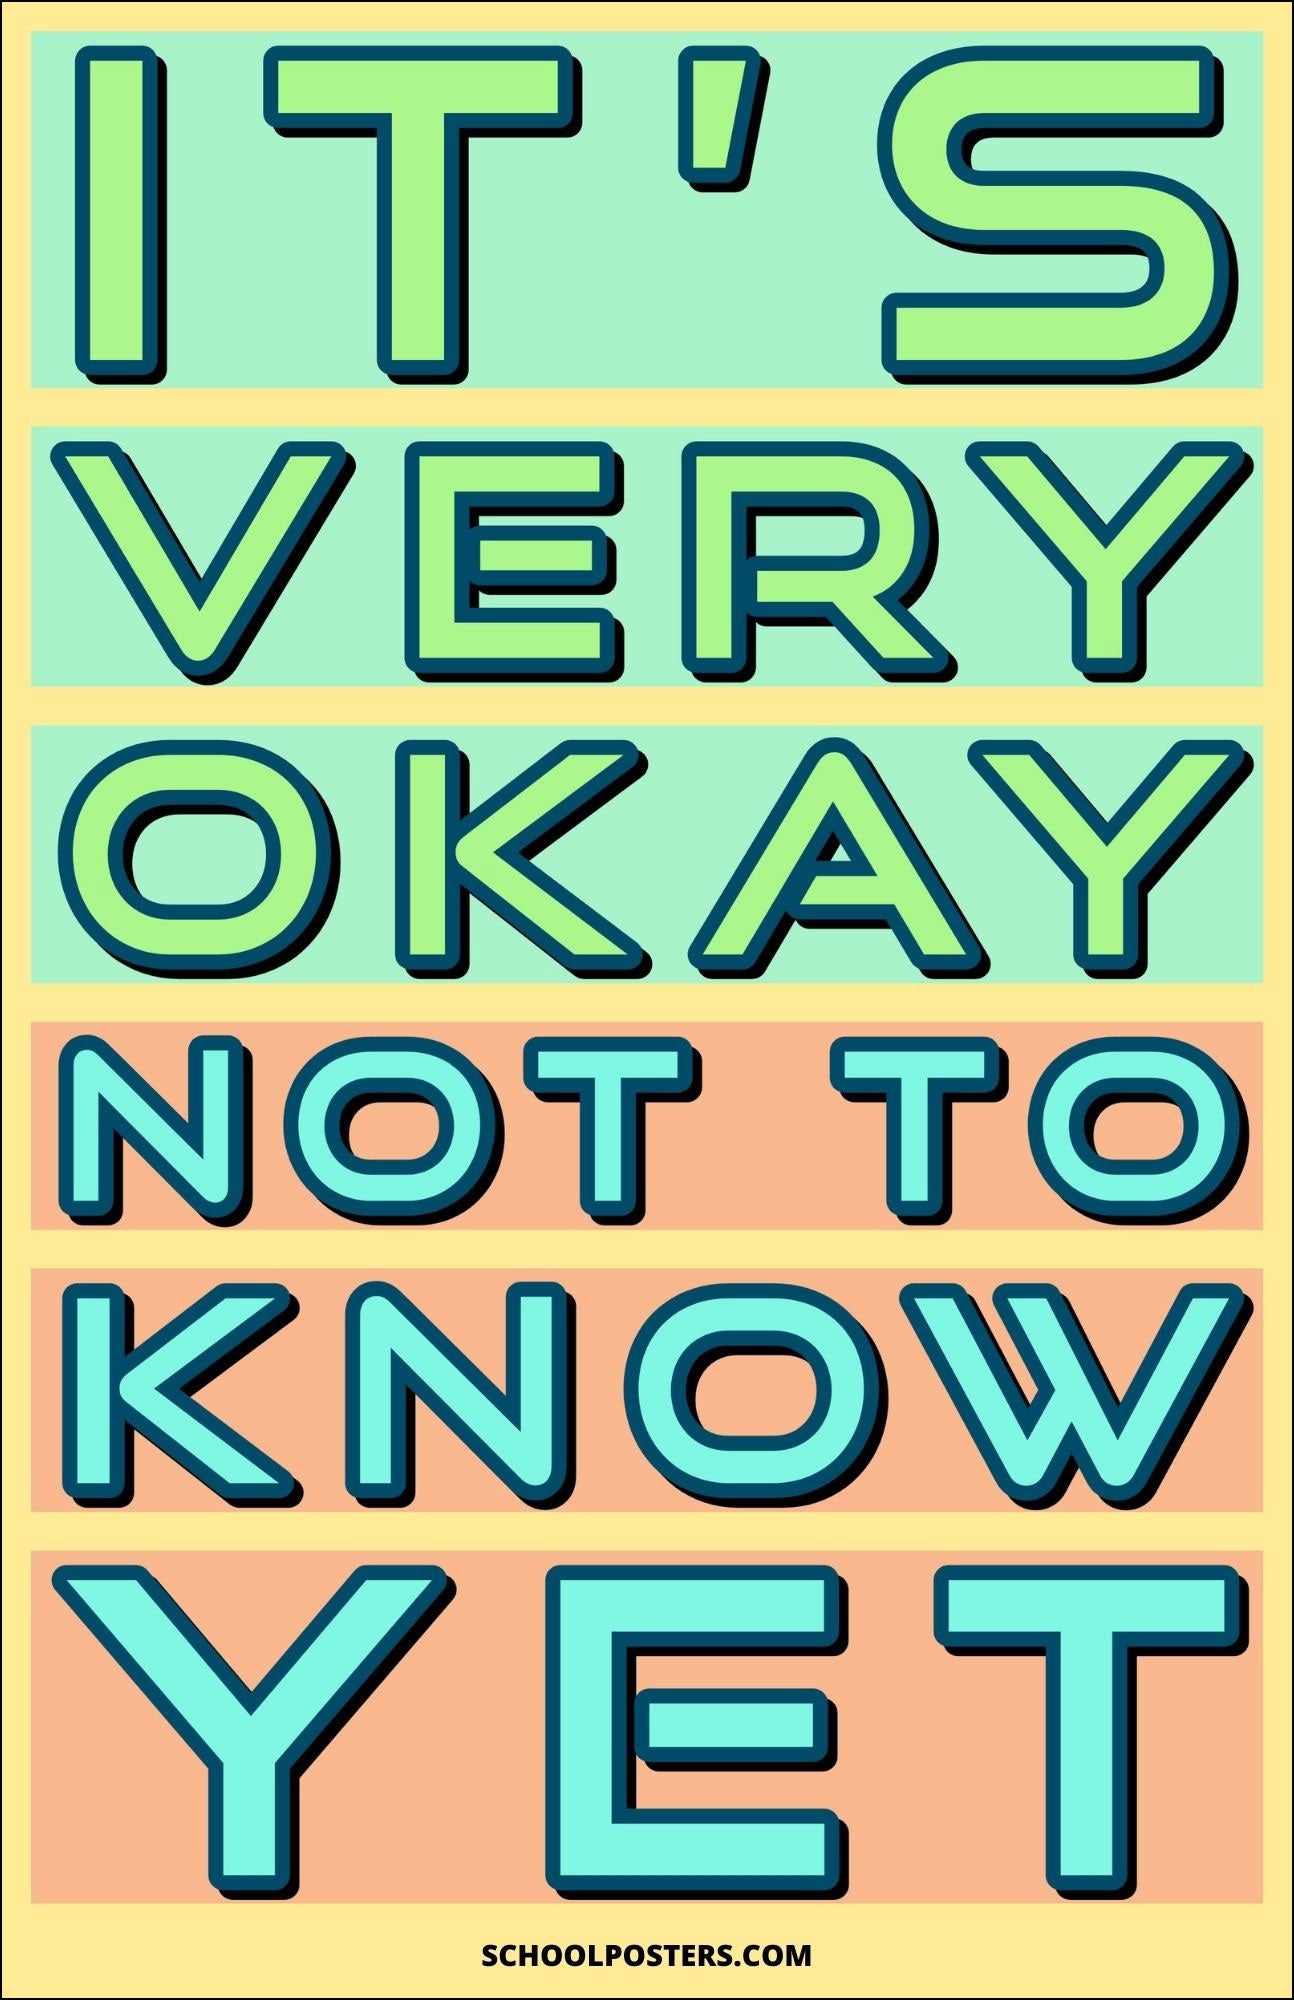 Not To Know Yet Poster